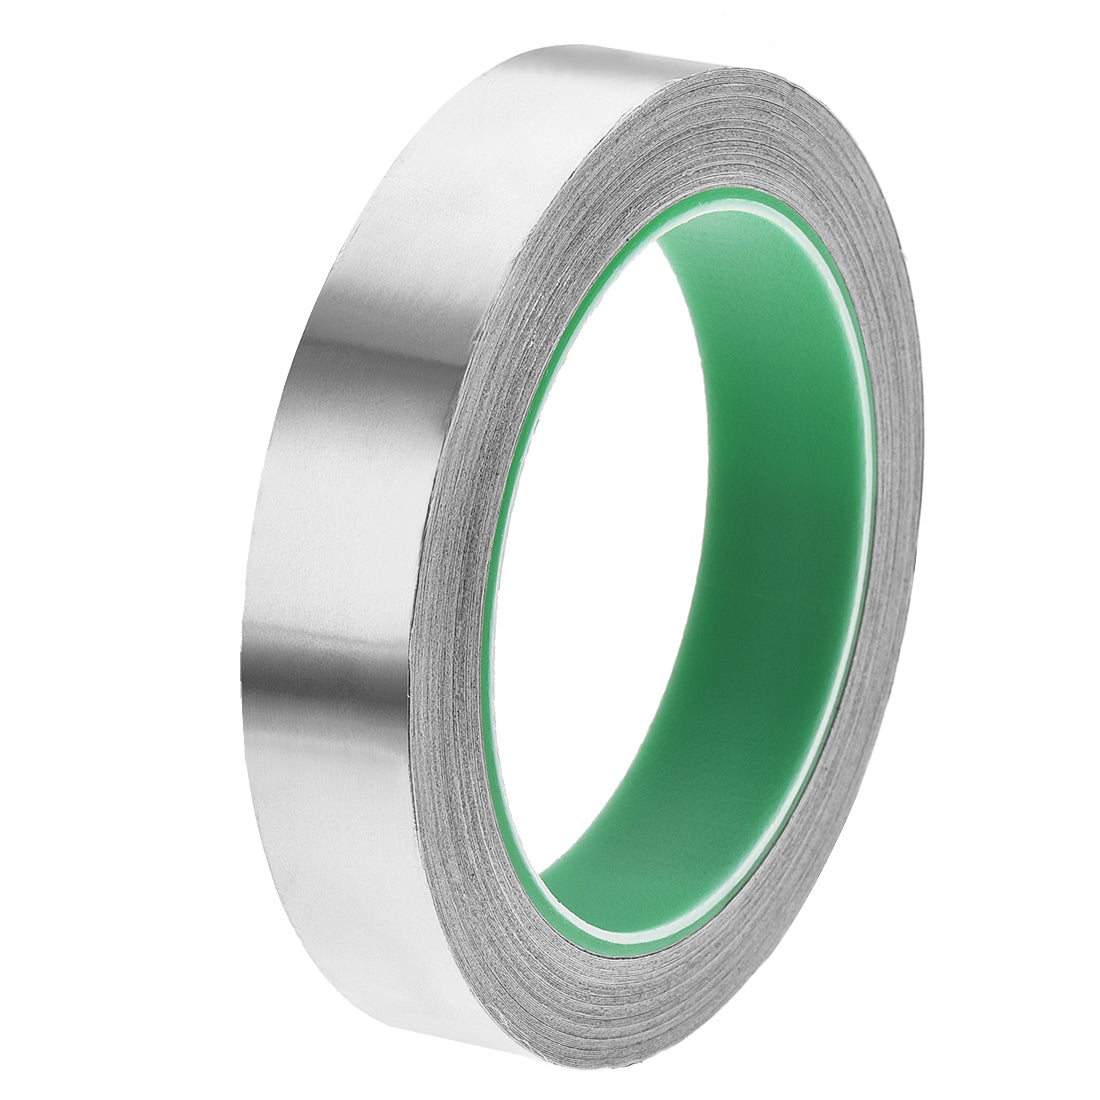 uxcell Uxcell 18mm Aluminum Foil Tape for HVAC,Patching Hot and Cold Air Ducts 20m/65.6ft